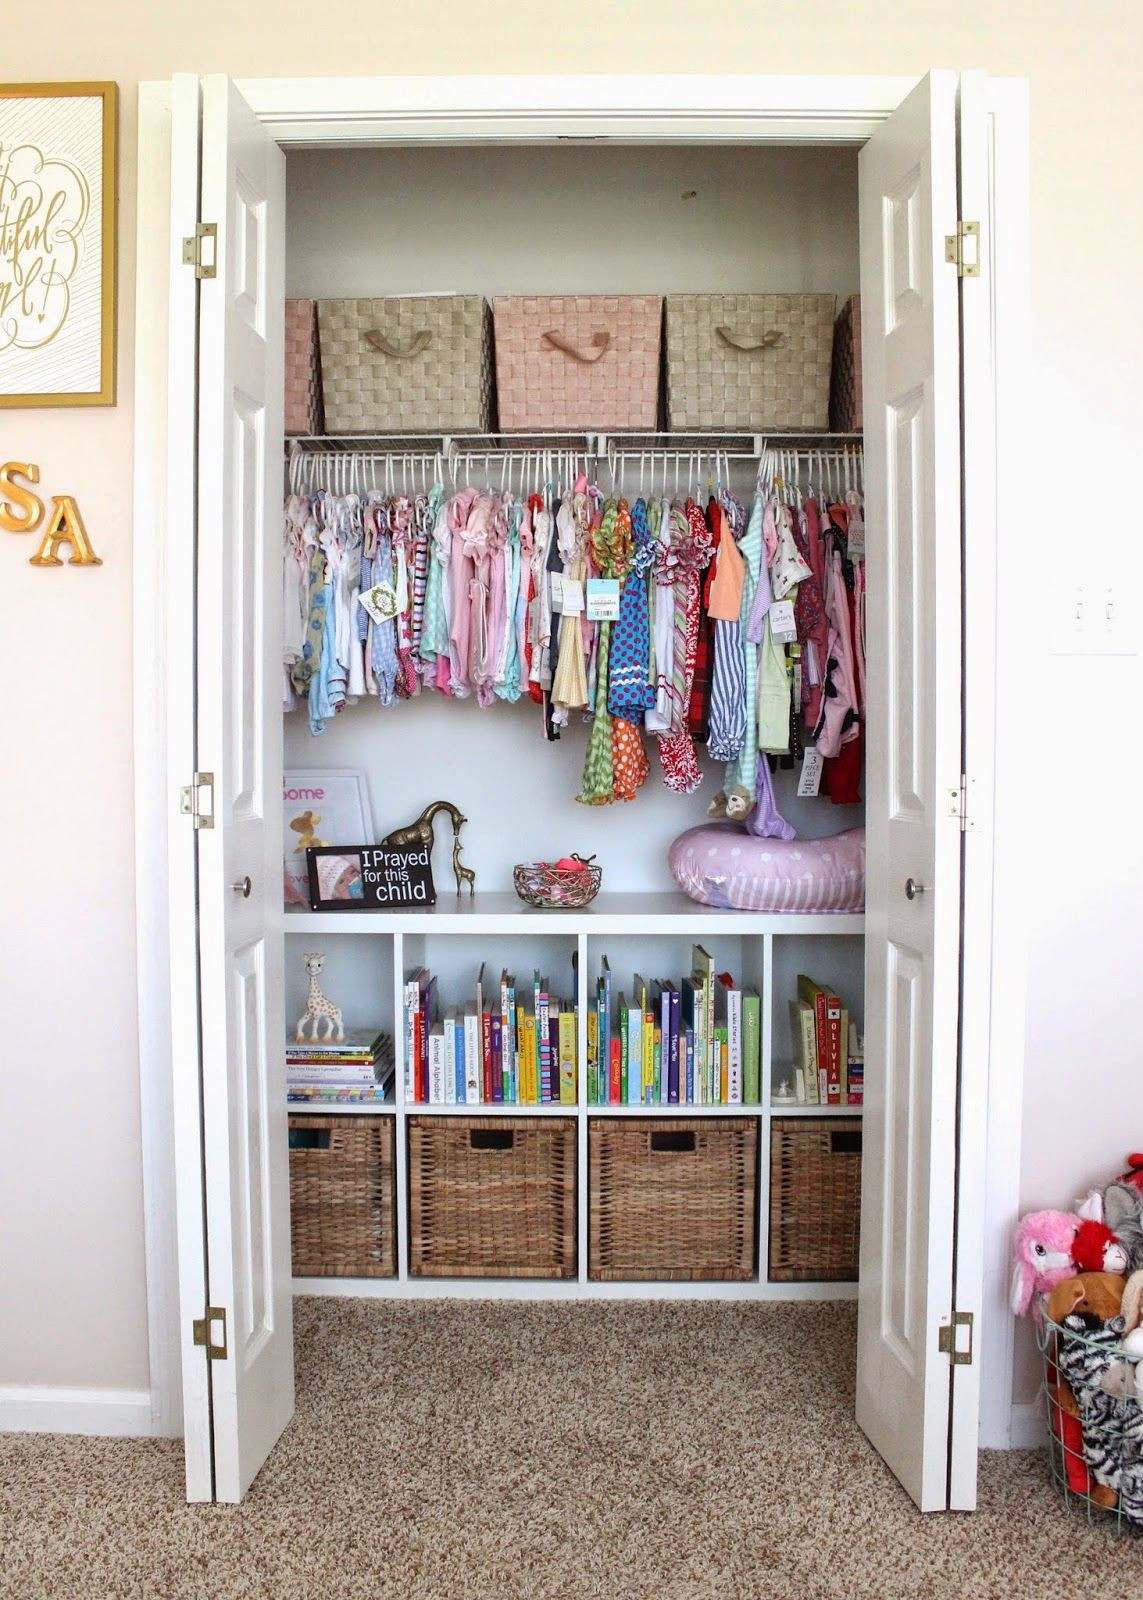 Childrens Bedroom Storage Ideas
 Fantastic Ideas for Organizing Kid s Bedrooms